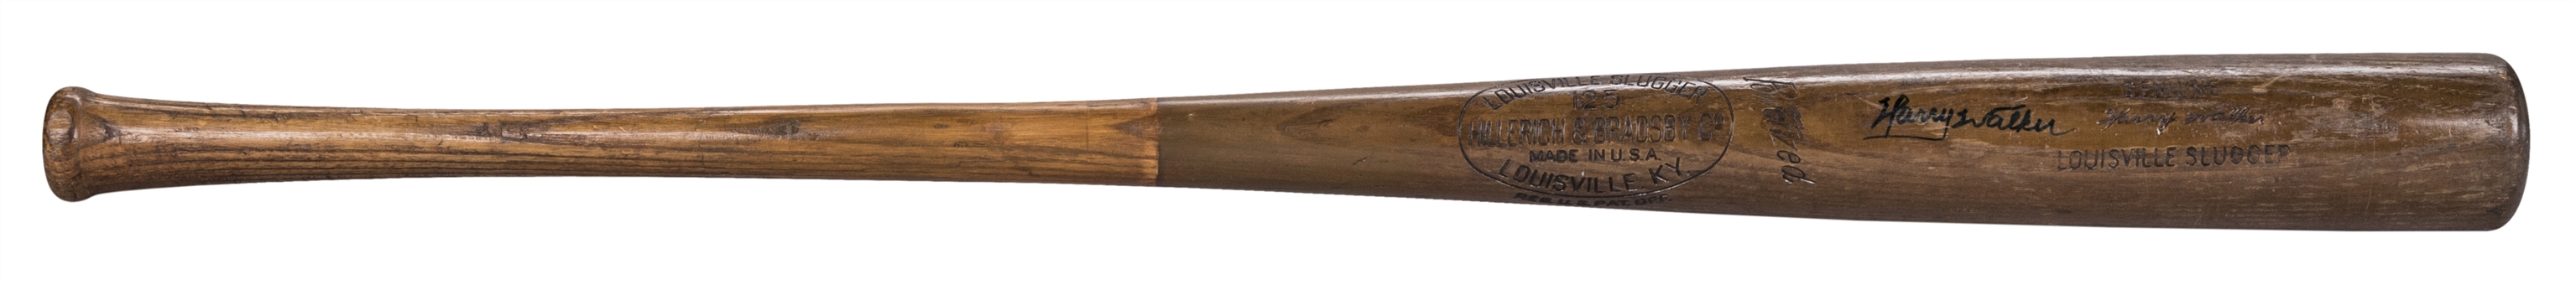 1959 Harry Walker Game Used and Signed Hillerich & Bradsby P53 Model Bat (PSA/DNA & Beckett)